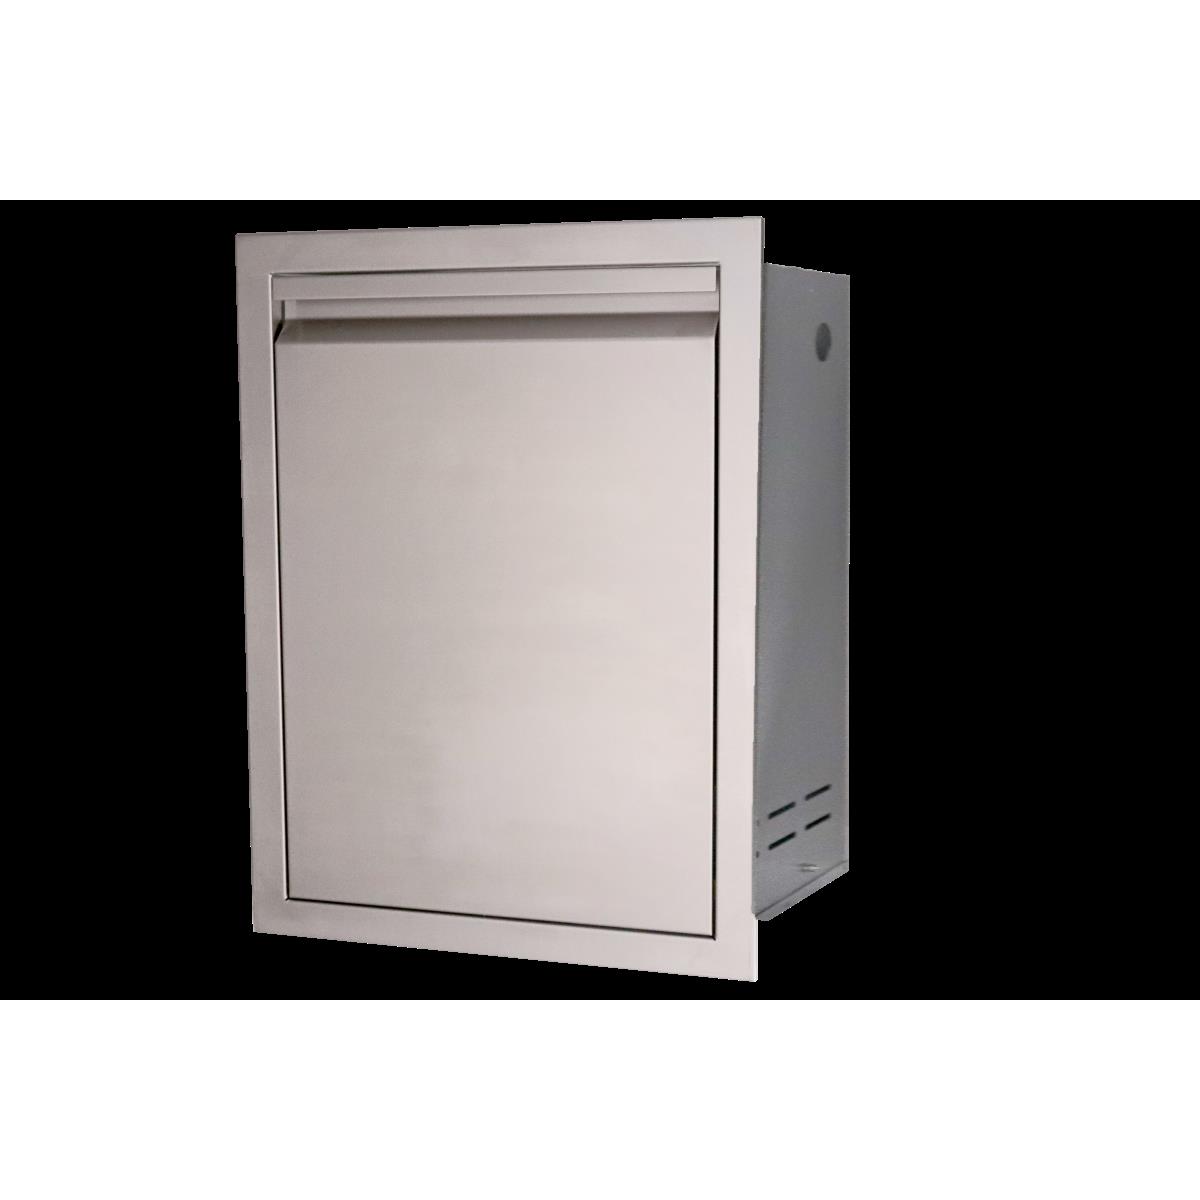 Vtd2 Valiant Stainless Double Trash Drawer-fully Enclosed